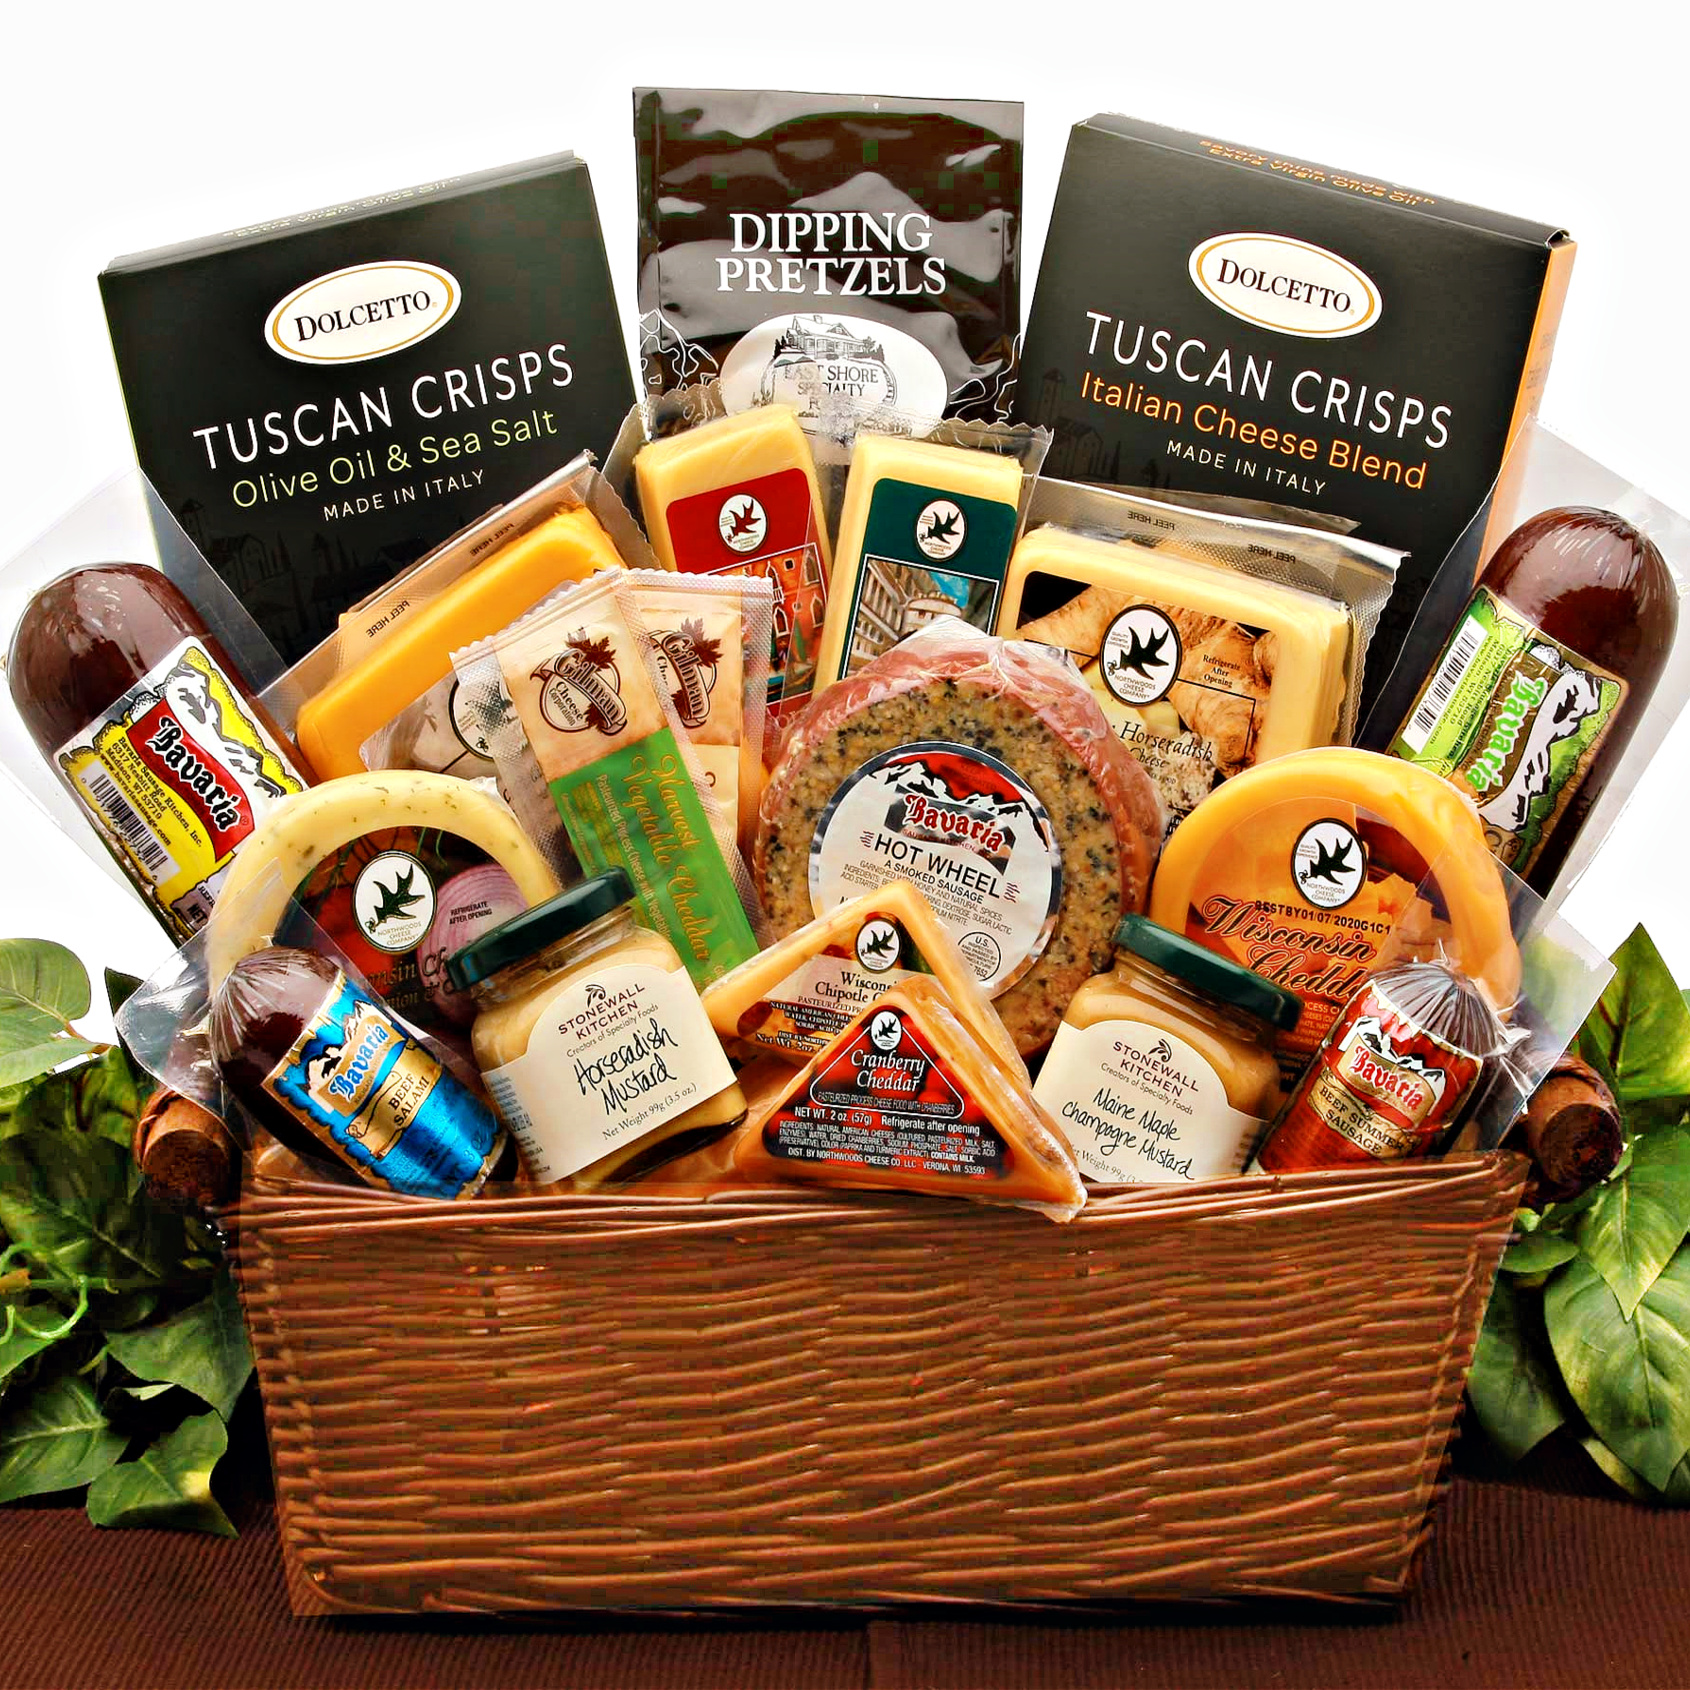 GiftWorld Ultimate Meat and Cheese Gift Basket For Men and Women, Hot  Sauce, Meat, Cheese and Crackers Assortment, Summer Sausage Food Gifts, Meat  Sampler Food Gift Basket, Christmas Food Gifts 